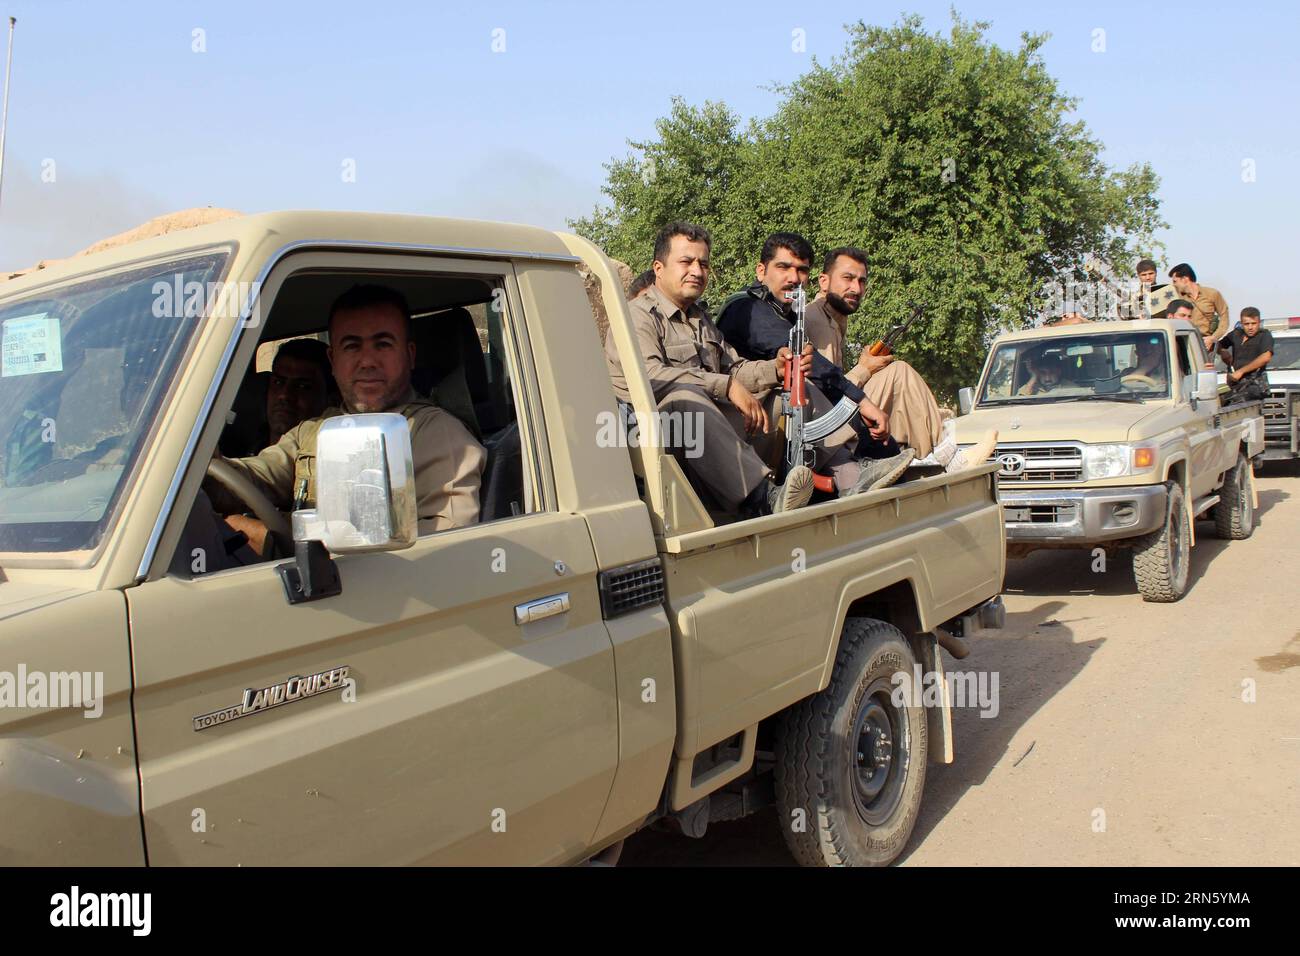 AKTUELLES ZEITGESCHEHEN Kämpfer der Peschmerga im Irak (150706) -- KIRKUK, July 06. 2015 -- Soldiers of Kurdish peshmerga forces sit on a military vehicle on the way to the front line to fight against Islamic State (IS) in the villages of Mujamaa al-Shahid, Mariyam Beg and Murra, which located some 30 km southwest of Kirkuk, north Iraq, July 6, 2015. ) (dzl) IRAQ-KIRKUK-KURDISH SOLDIERS AkoxZangana PUBLICATIONxNOTxINxCHN   News Current events Fighters the Peshmerga in Iraq 150706 Kirkuk July 06 2015 Soldiers of Kurdish Peshmerga Forces Sit ON a Military Vehicle ON The Way to The Front Line to Stock Photo